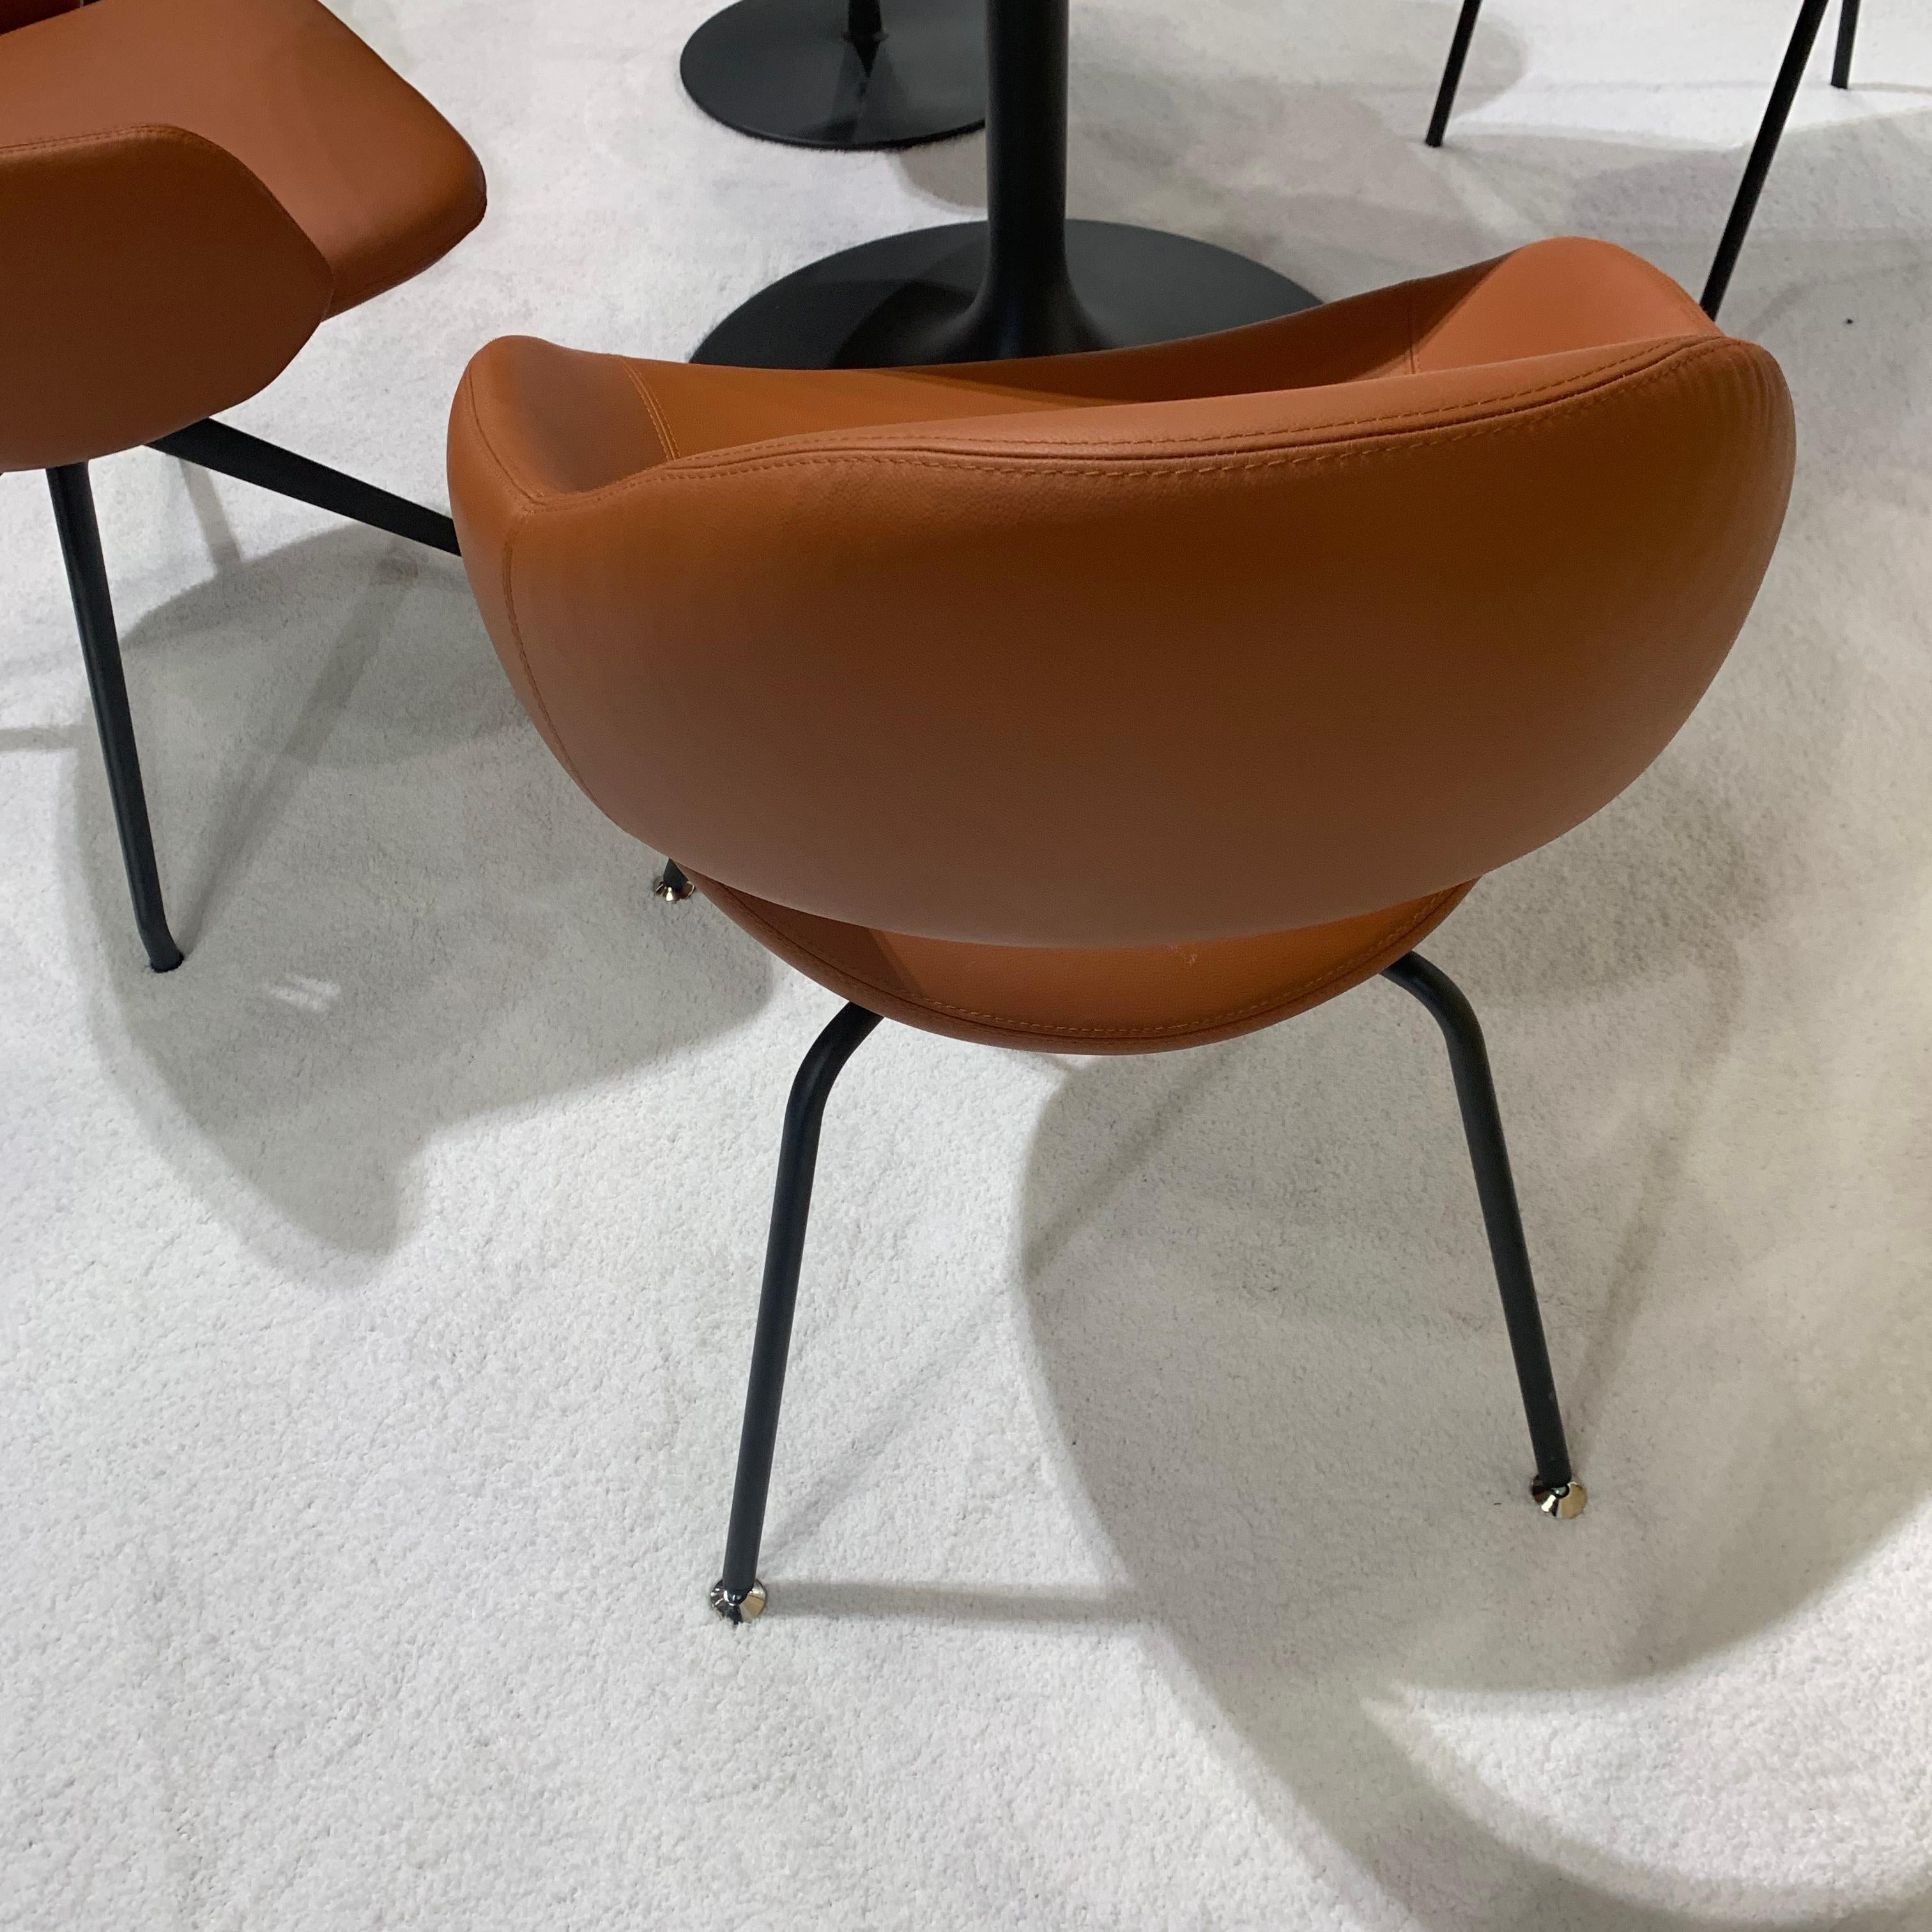 Extremely comfortable dining and meeting chair designed by René Holten. A model that acquired its name because its profile resembled that of the feared predator. However, you have nothing to fear from this shark. On the contrary. It’s an extremely